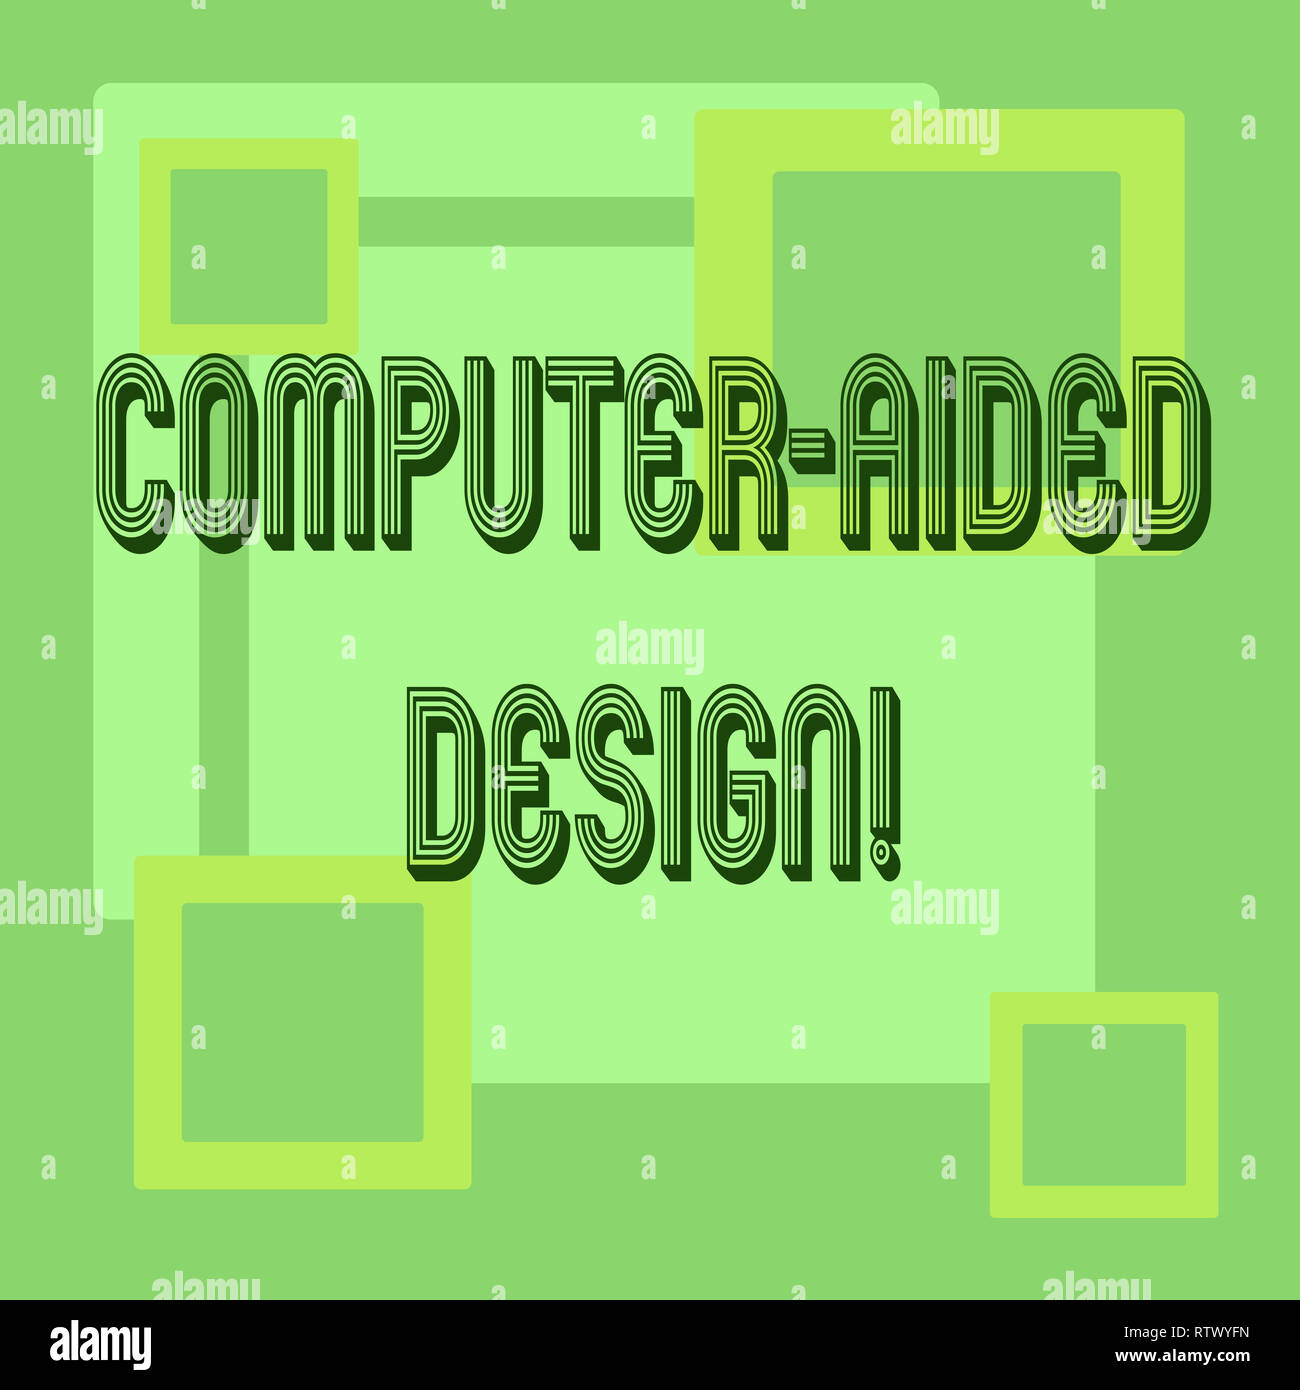 Handwriting Text Computer Aided Design Concept Meaning Cad Industrial Designing By Using Electronic Devices Stock Photo Alamy